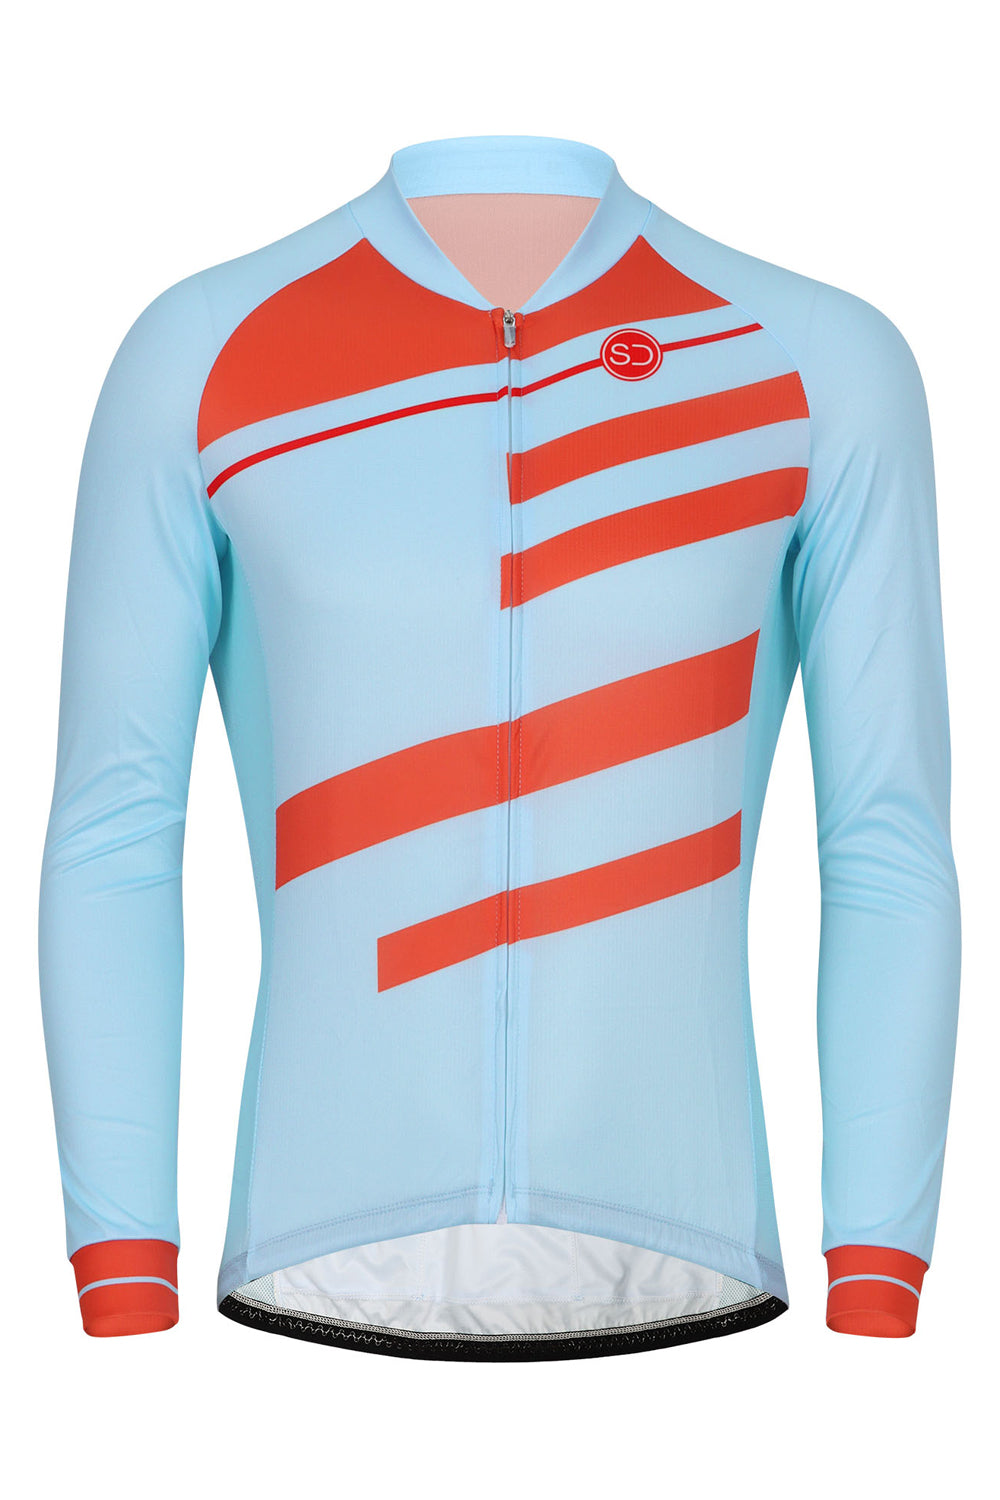 Sundried Ecrins Men's Long Sleeve Cycle Jersey Long Sleeve Jersey L Blue SD0443 L Blue Activewear